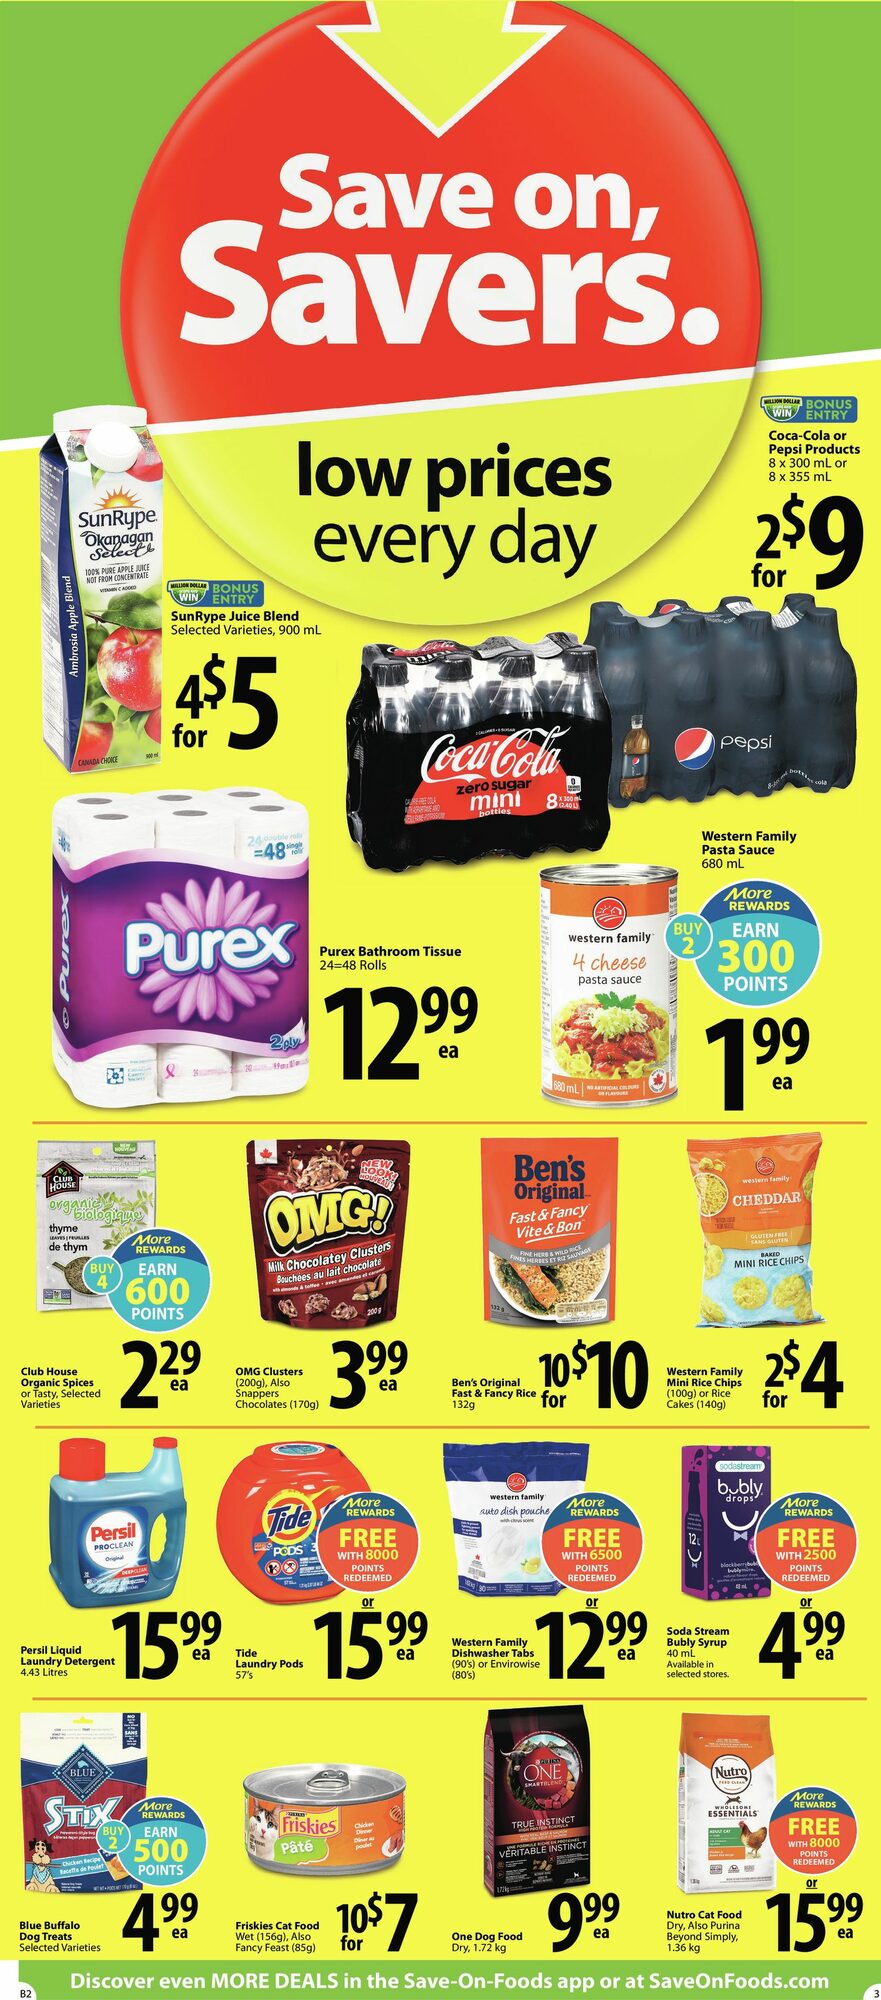 Save-On-Foods - Weekly Flyer Specials - Page 5